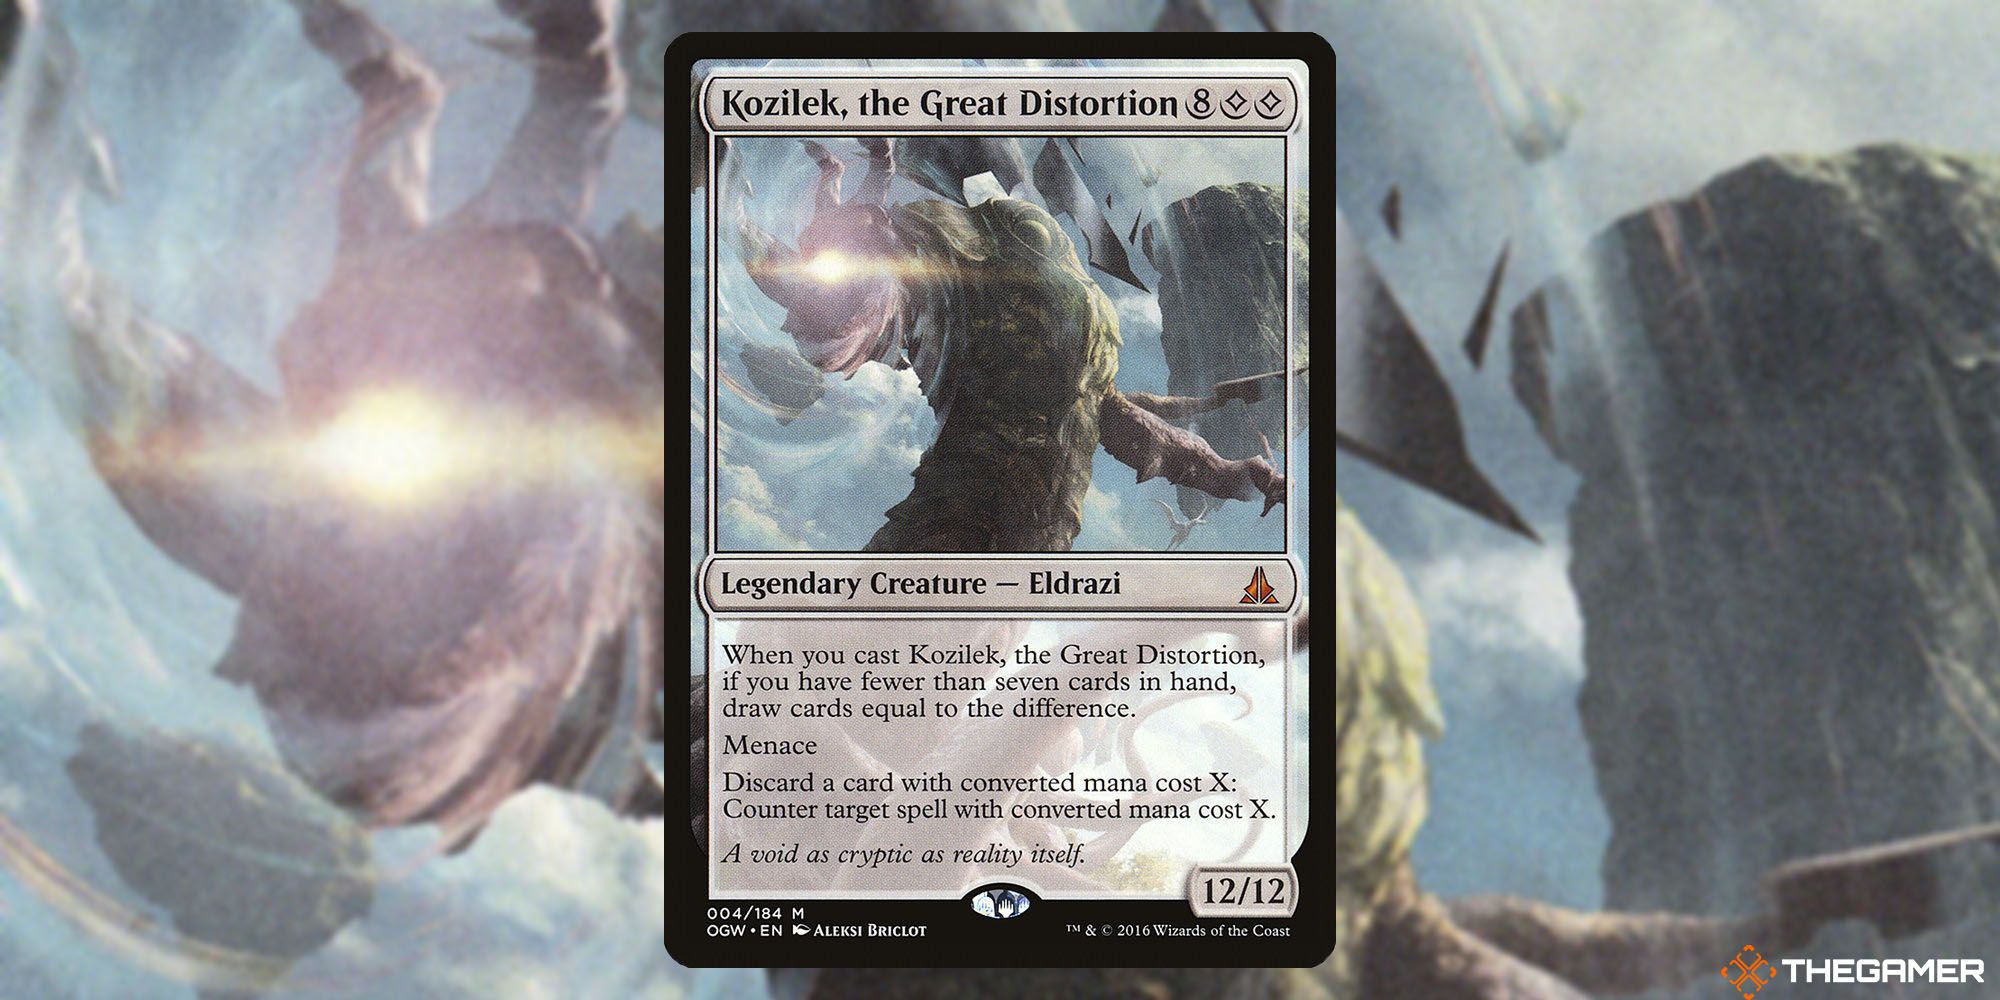 A ginormous Eldrazi titan stands tall, with it's hand pointing at the viewer. A spot of white light from the centre of the palm seems to visible distort the blue sky around it